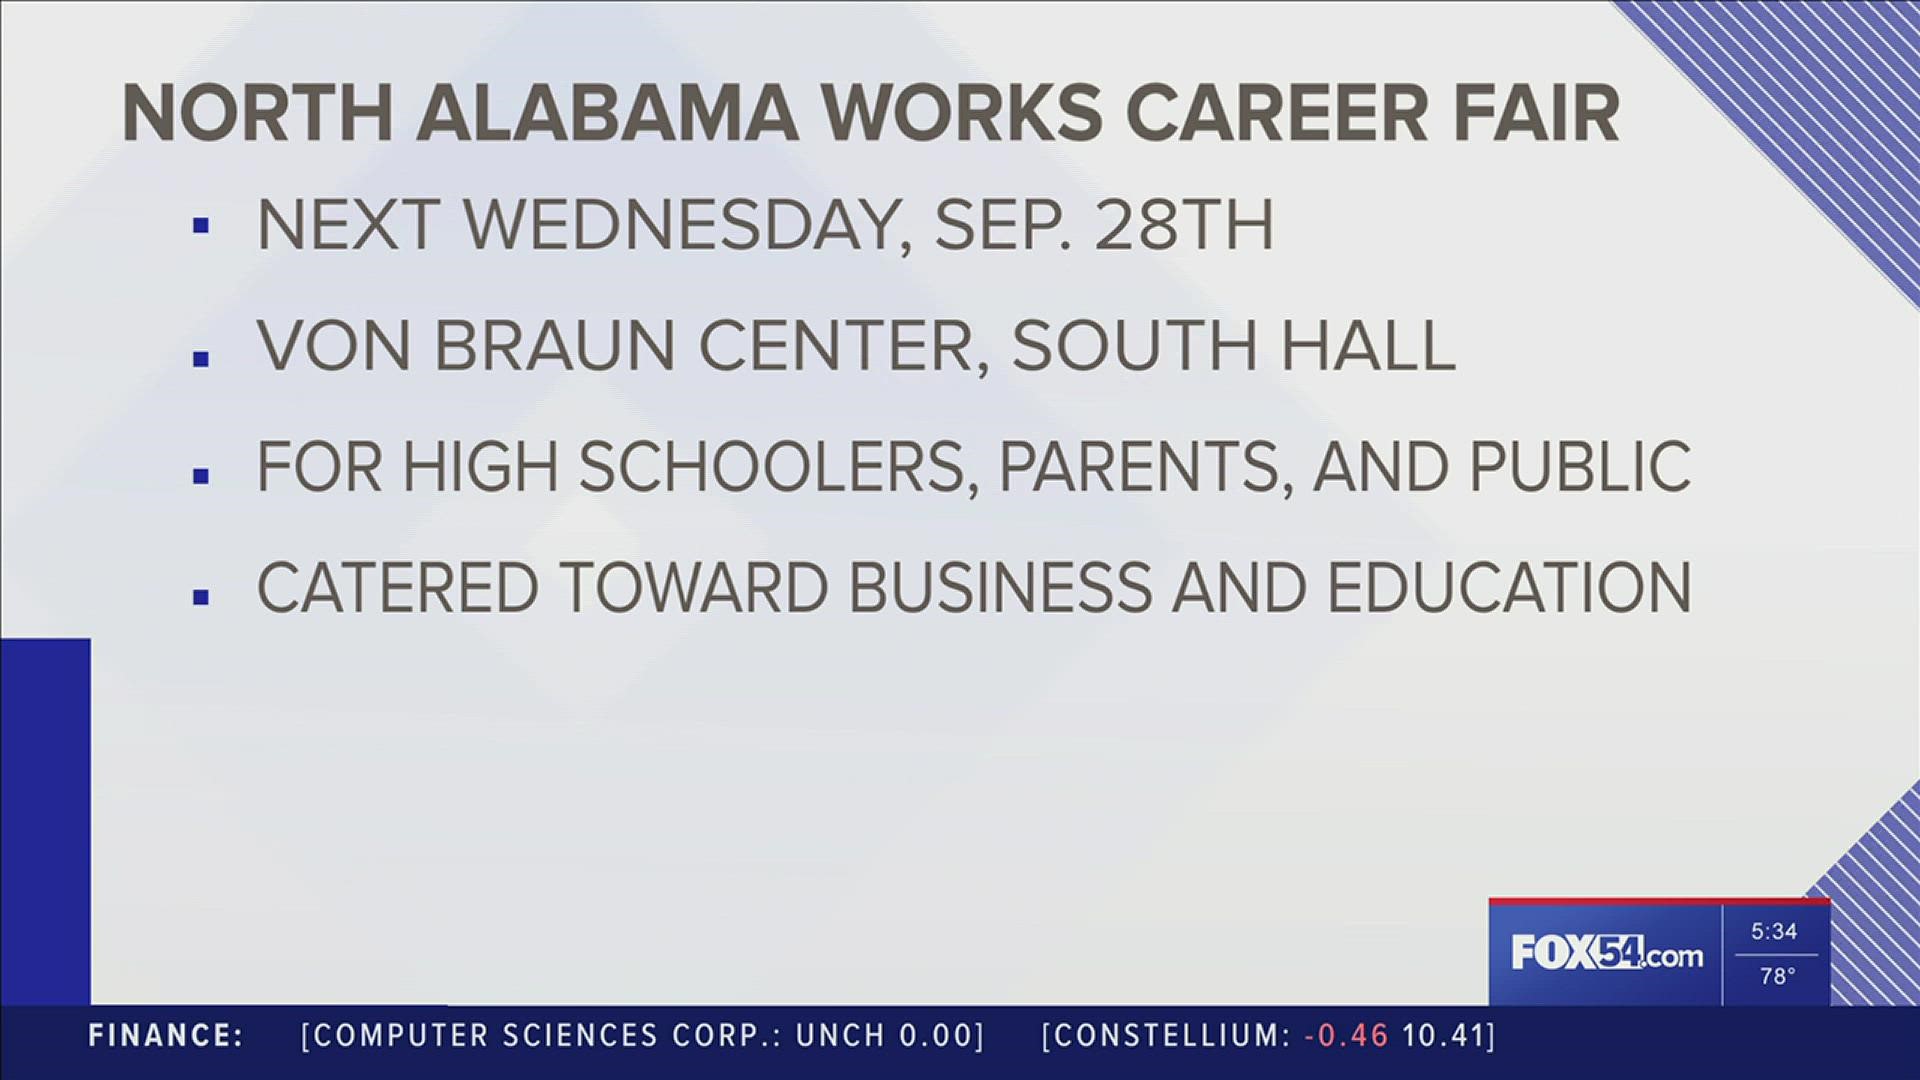 The career fair will take place on Sept. 28th at the Von Braun Center.